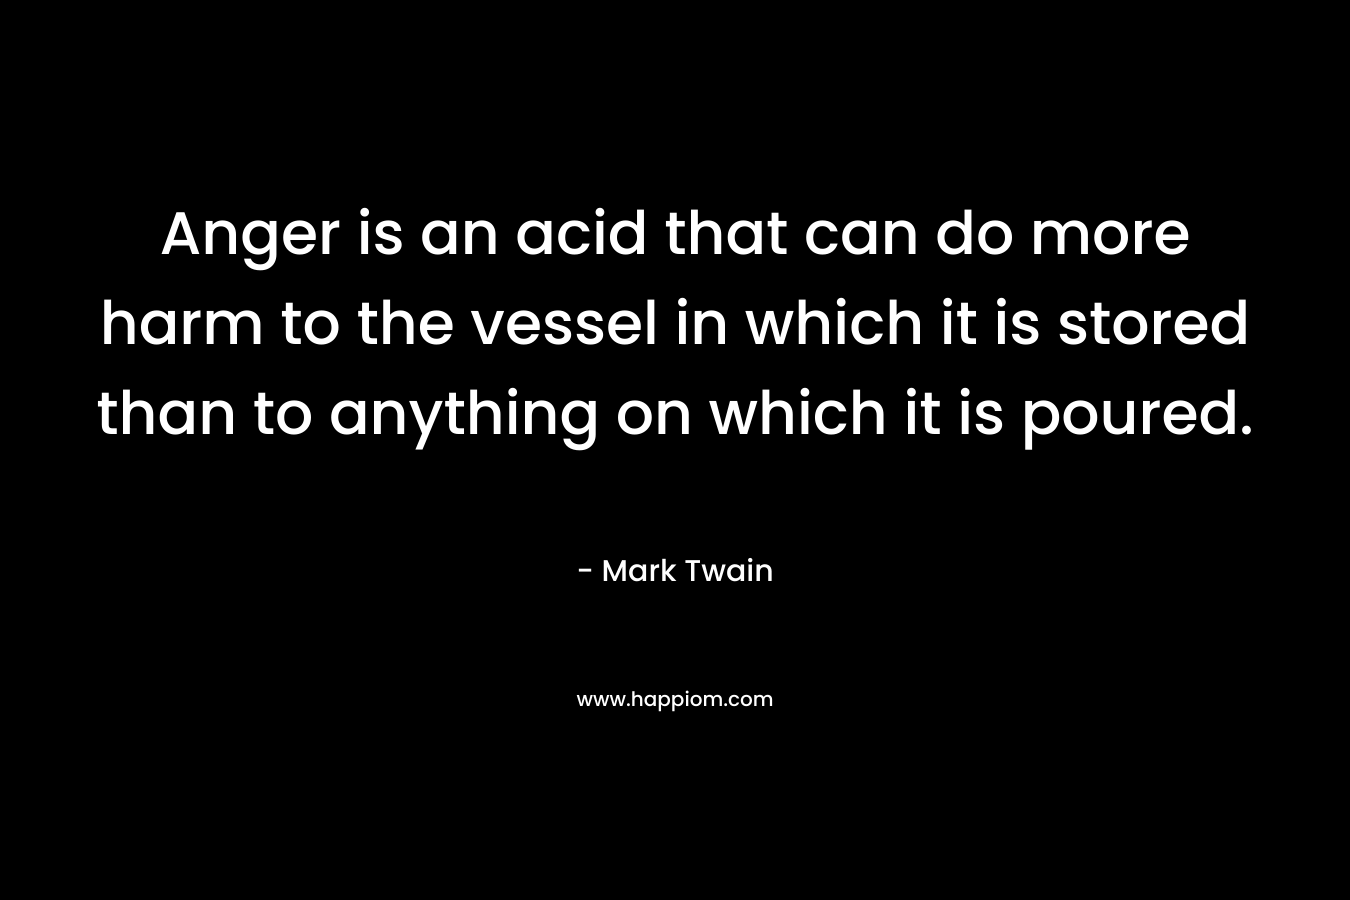 Anger is an acid that can do more harm to the vessel in which it is stored than to anything on which it is poured. – Mark Twain